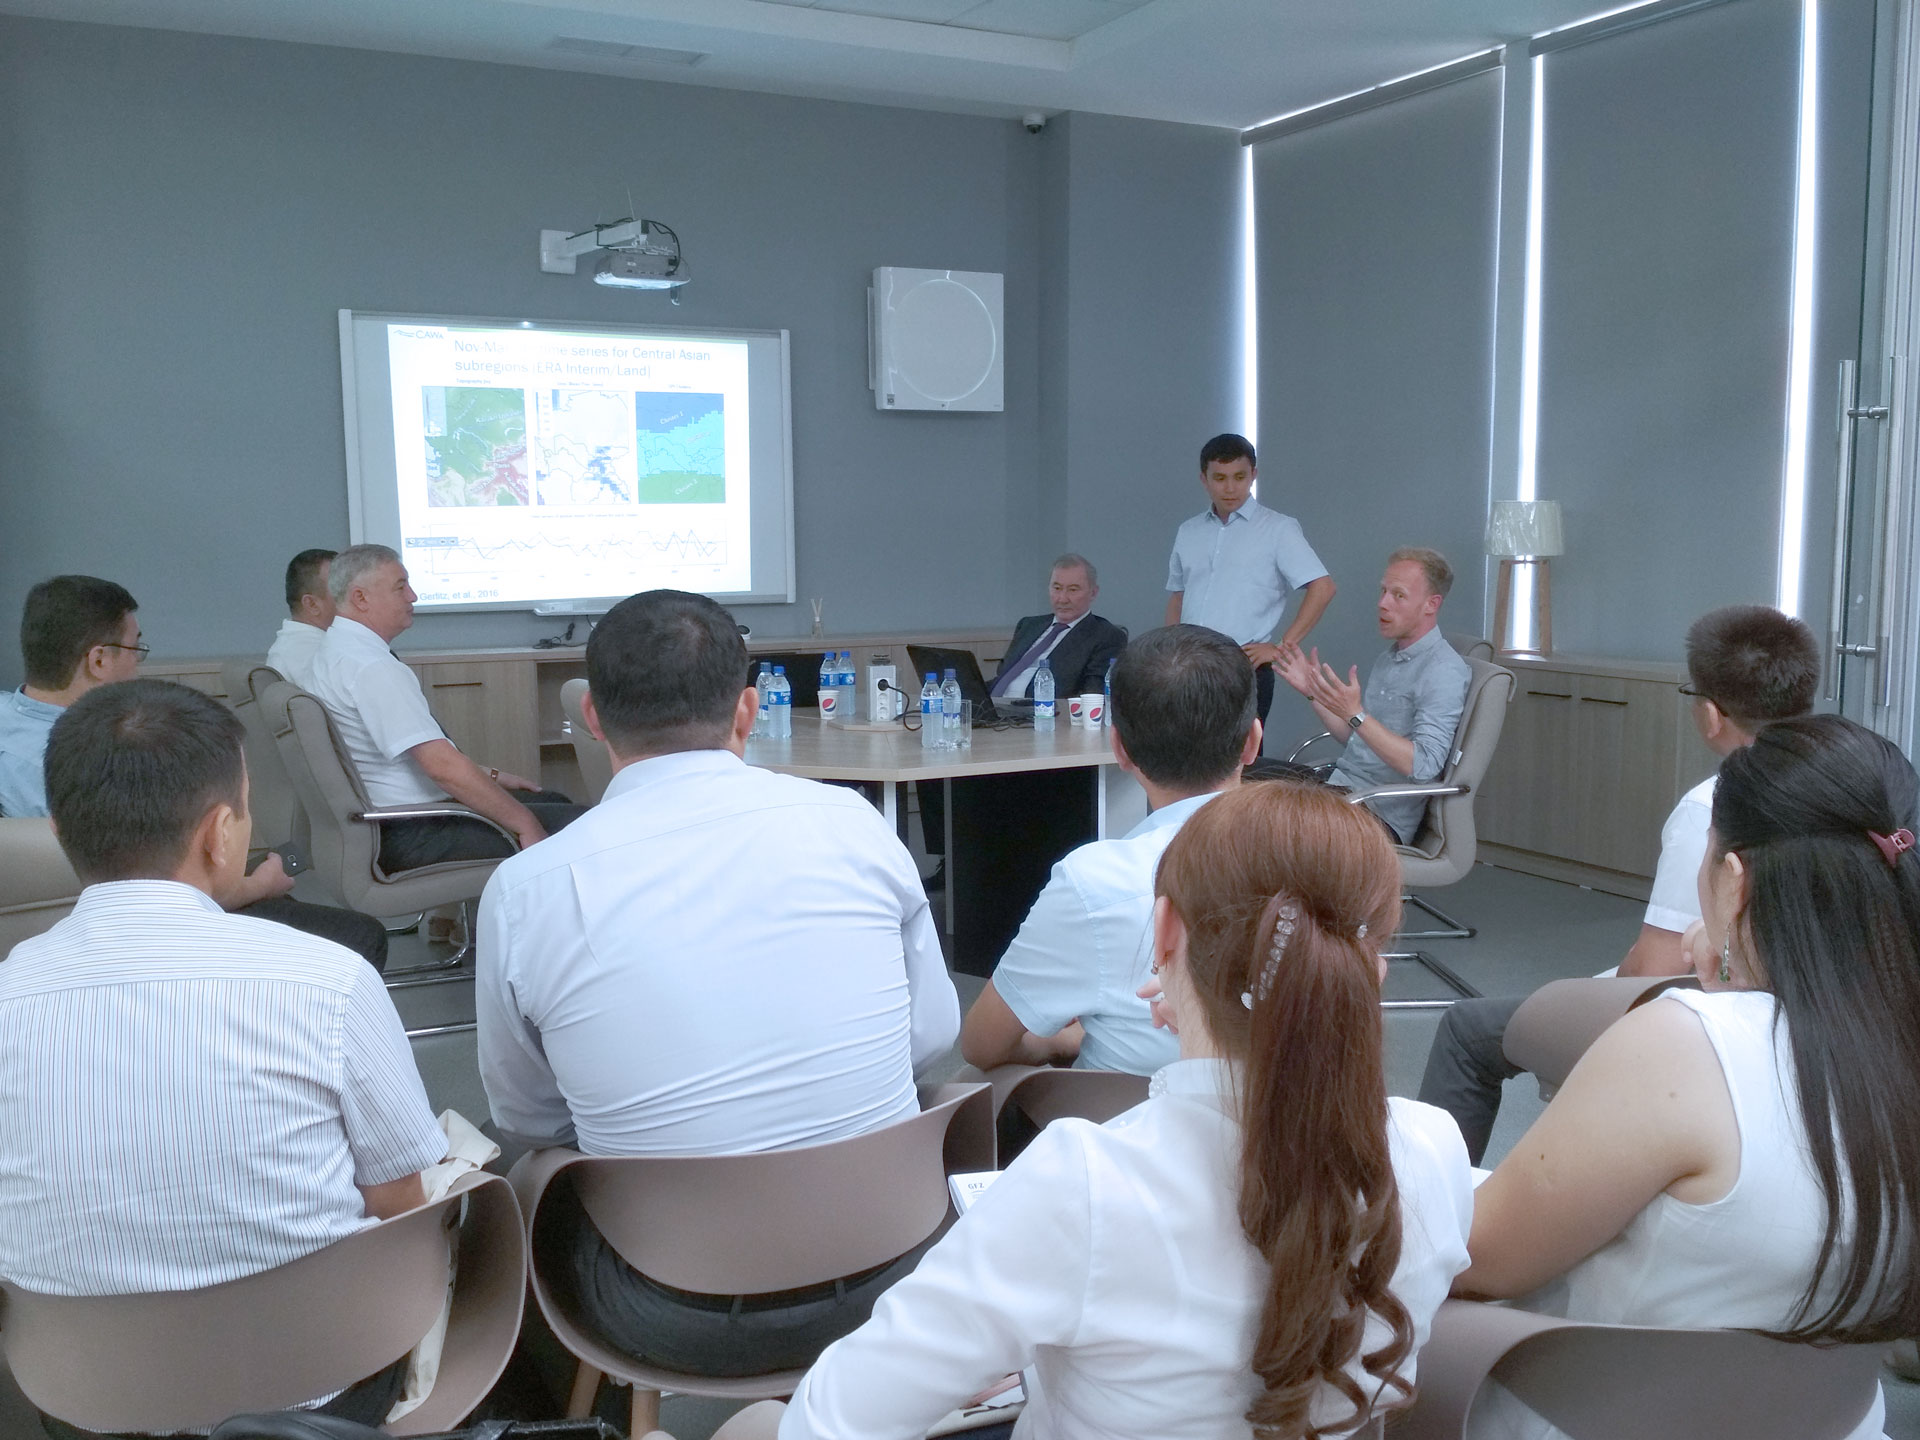 The workshop in Tashkent united climatologists and water specialists